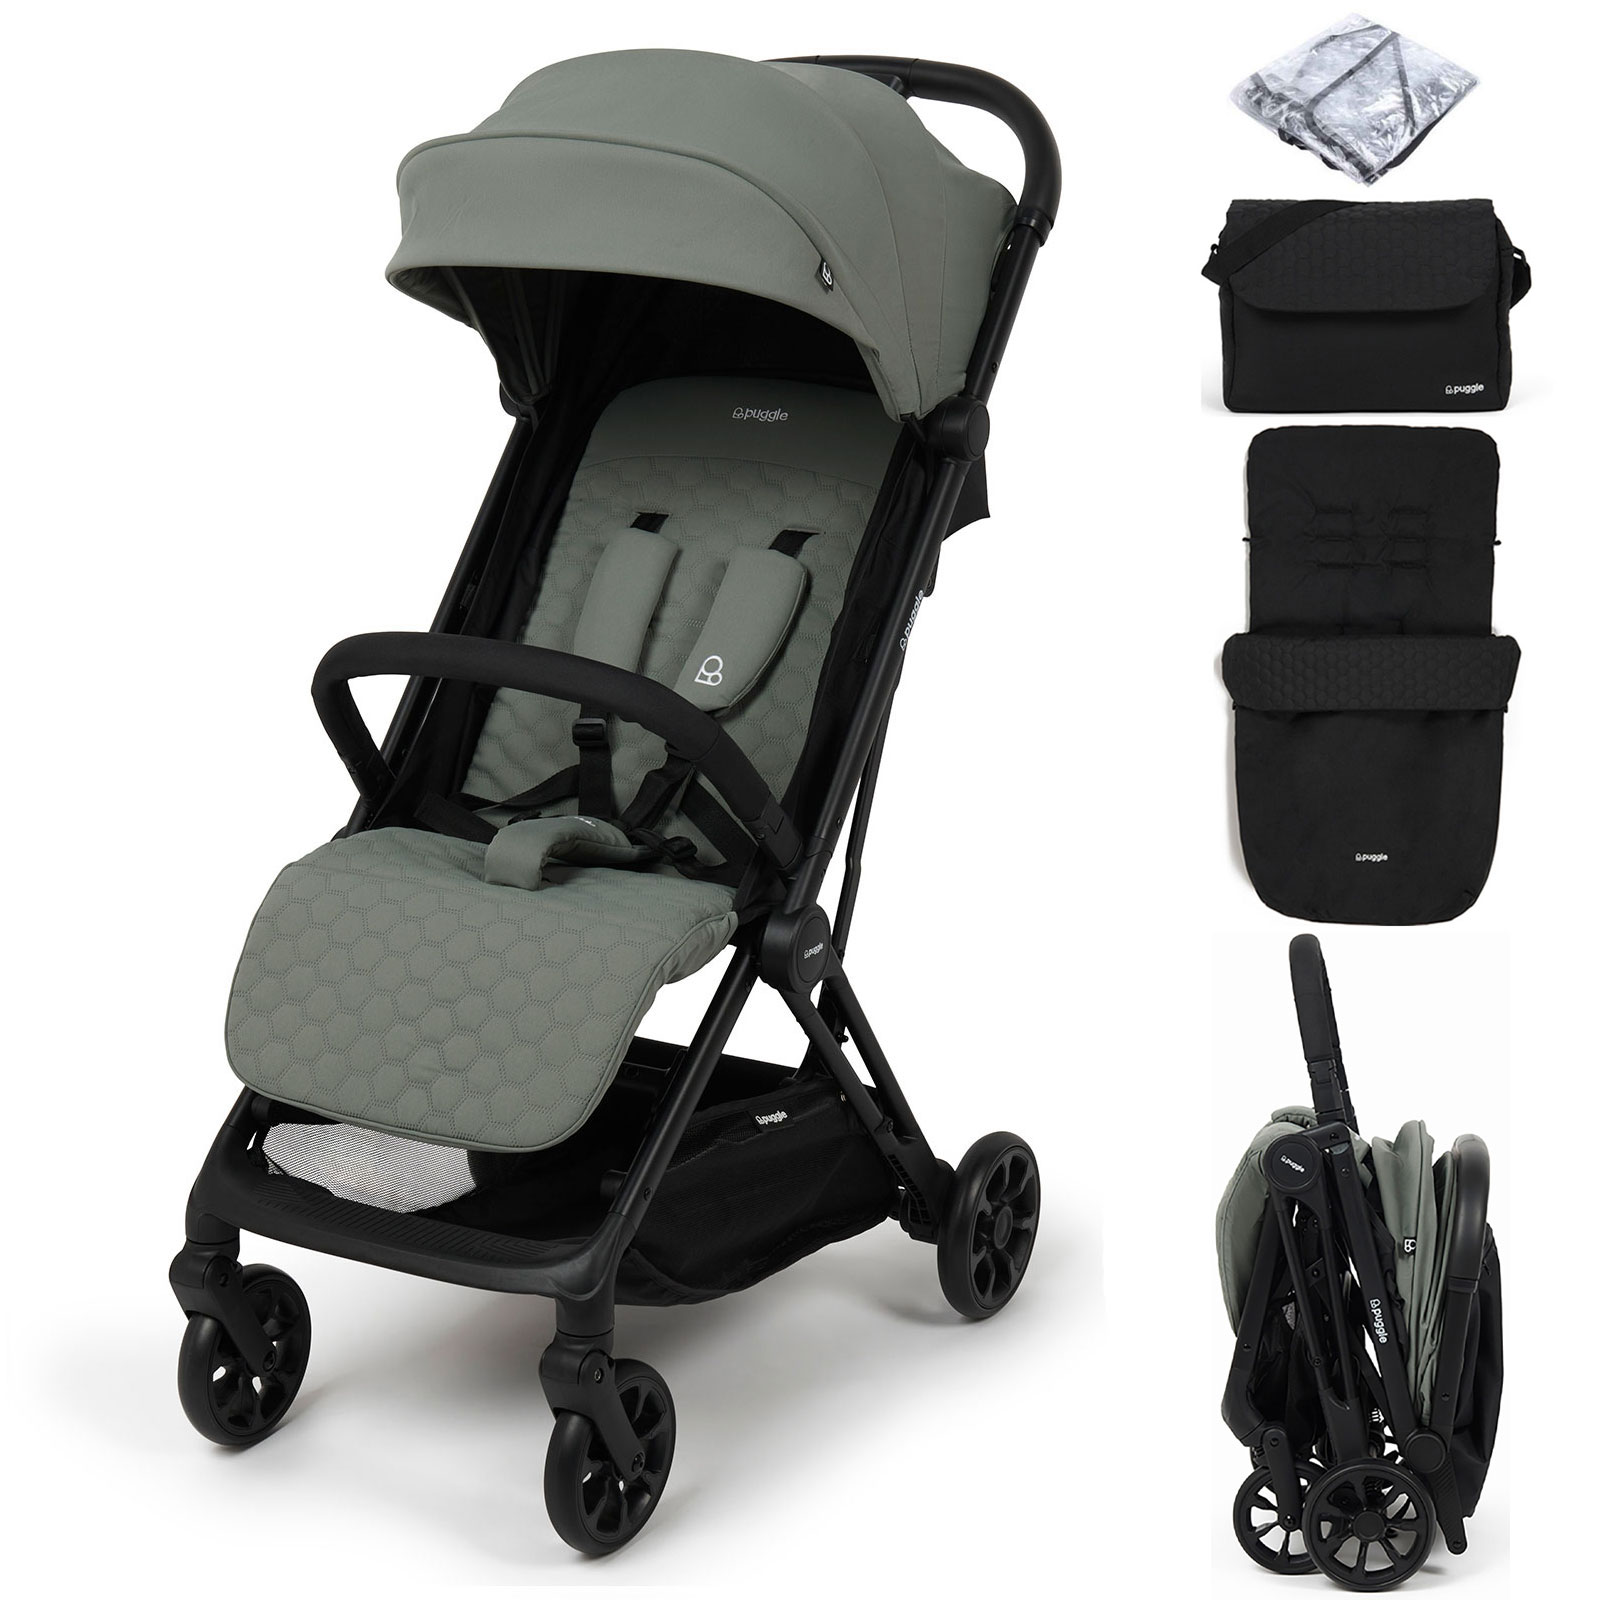 Puggle Escape Auto Quickfold Compact Pushchair With Raincover, Honeycomb Footmuff & Changing Bag - Seagrass Green